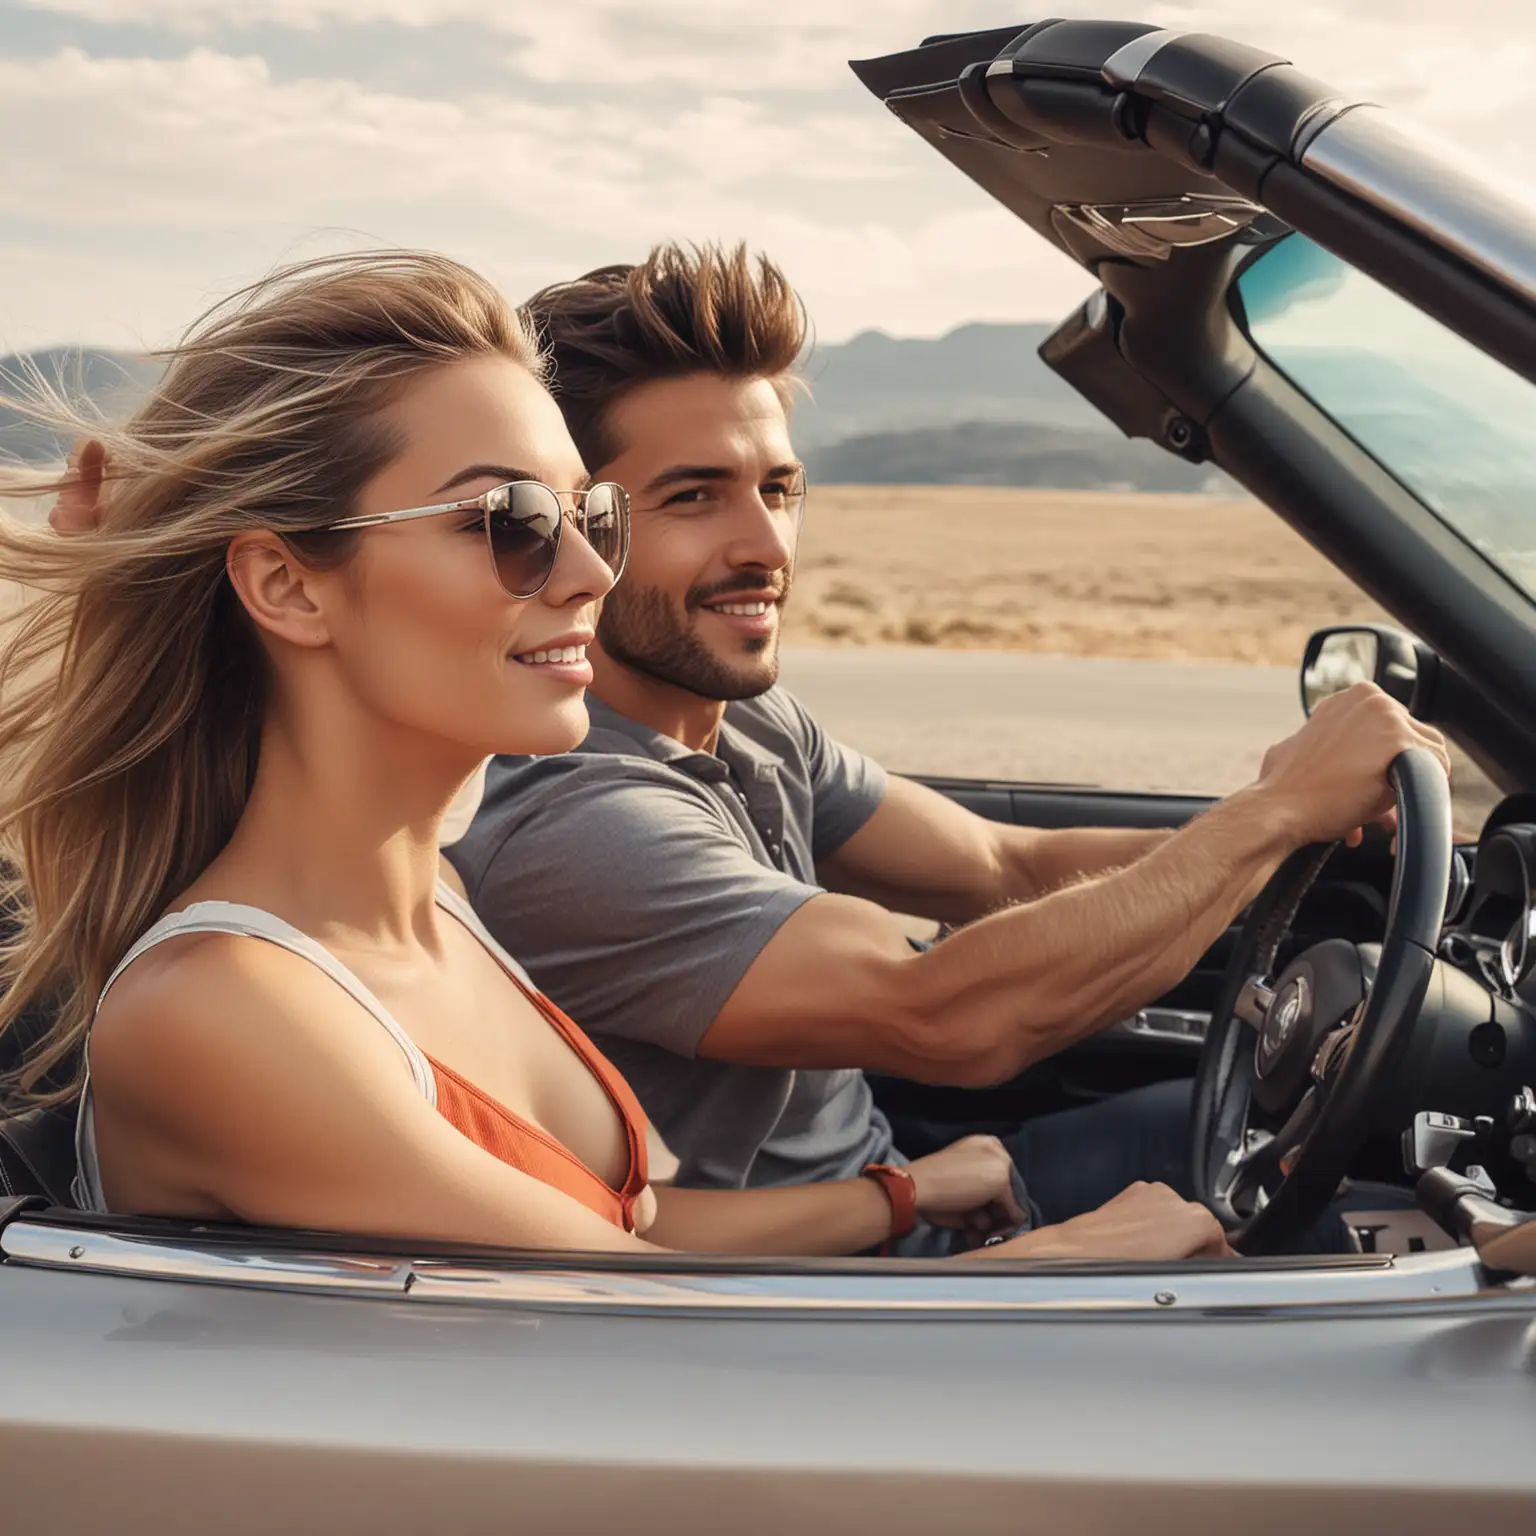 Attractive Couple Riding in a Luxury Sports Car